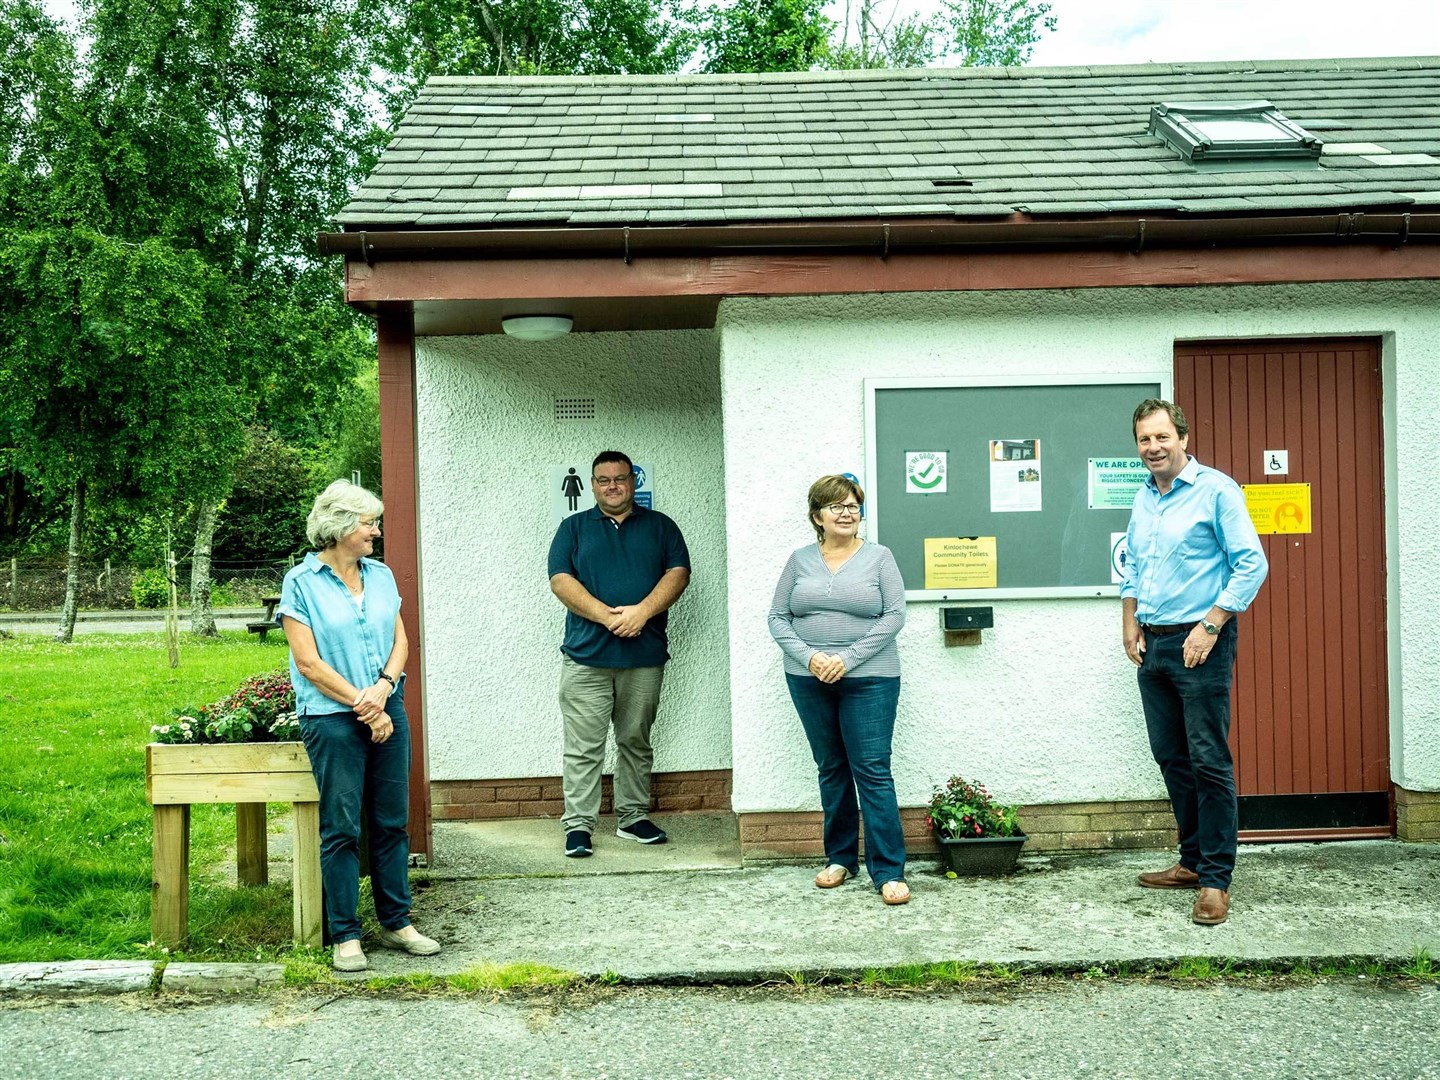 Pictured at the Kinlochewe Community Toilets are (from left) Mary Peart, Andrew Peacock, Karen Twist and David Whiteford.